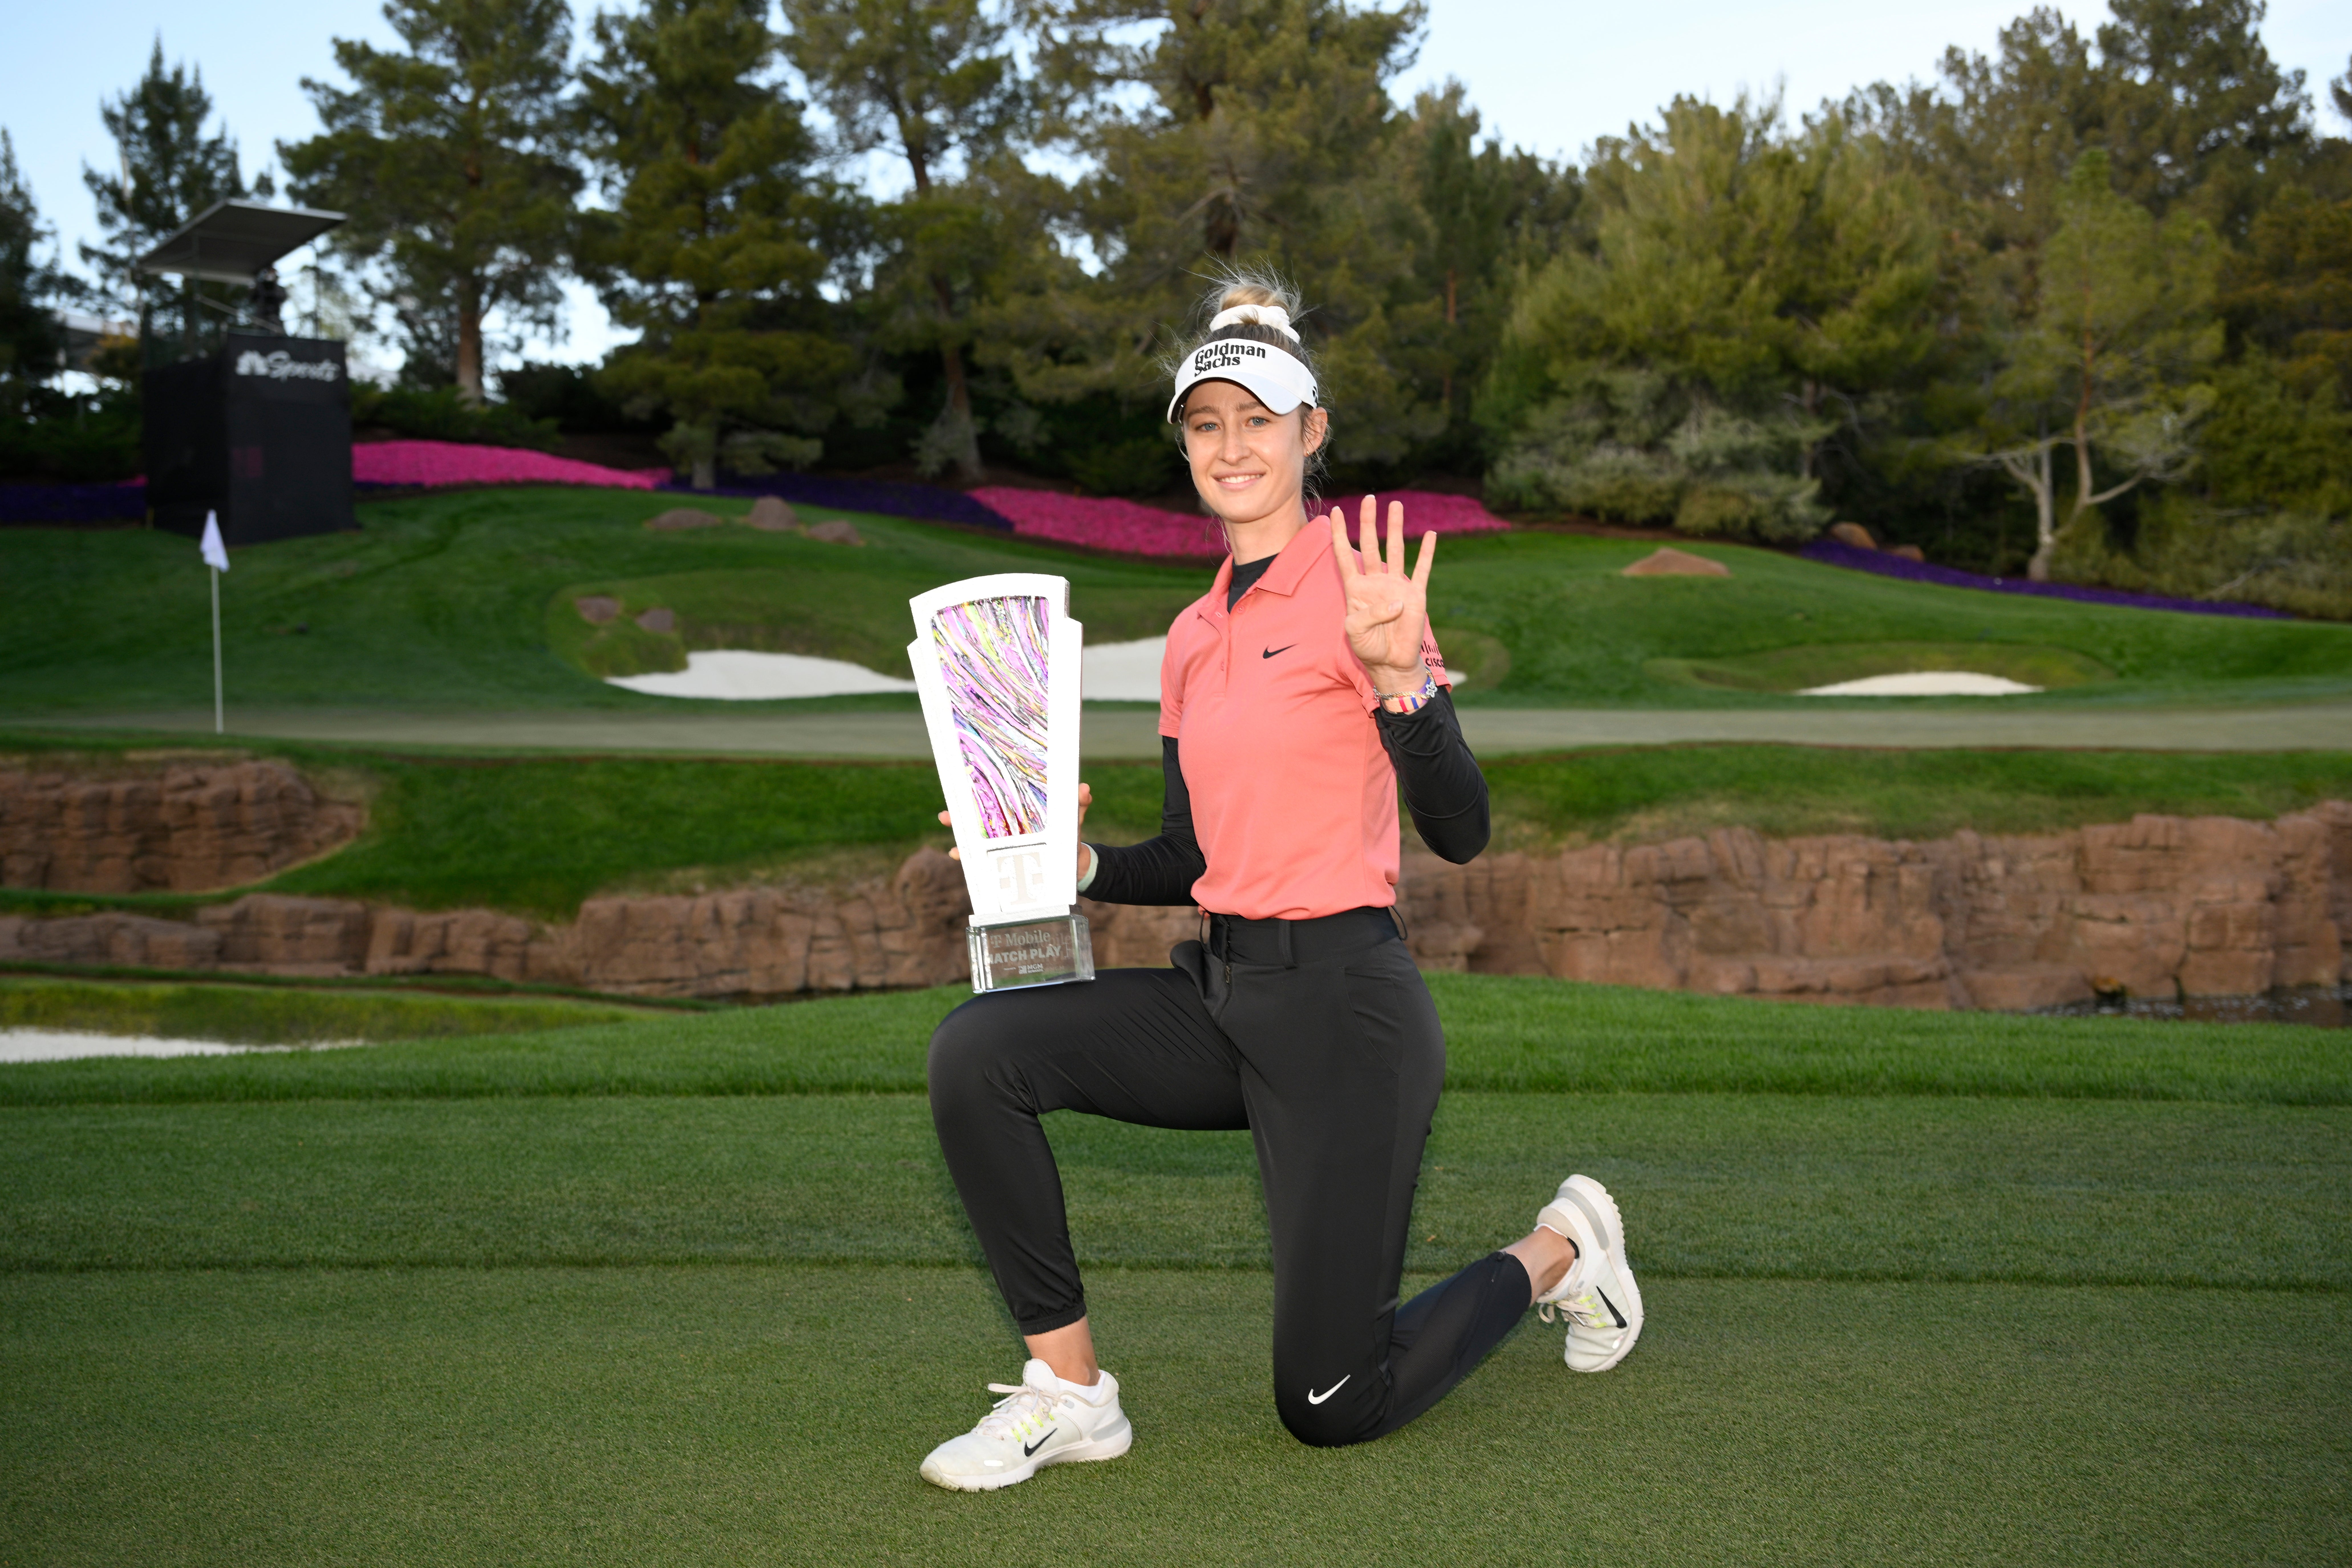 Nelly Korda secured her fourth consecutive LPGA Tour title